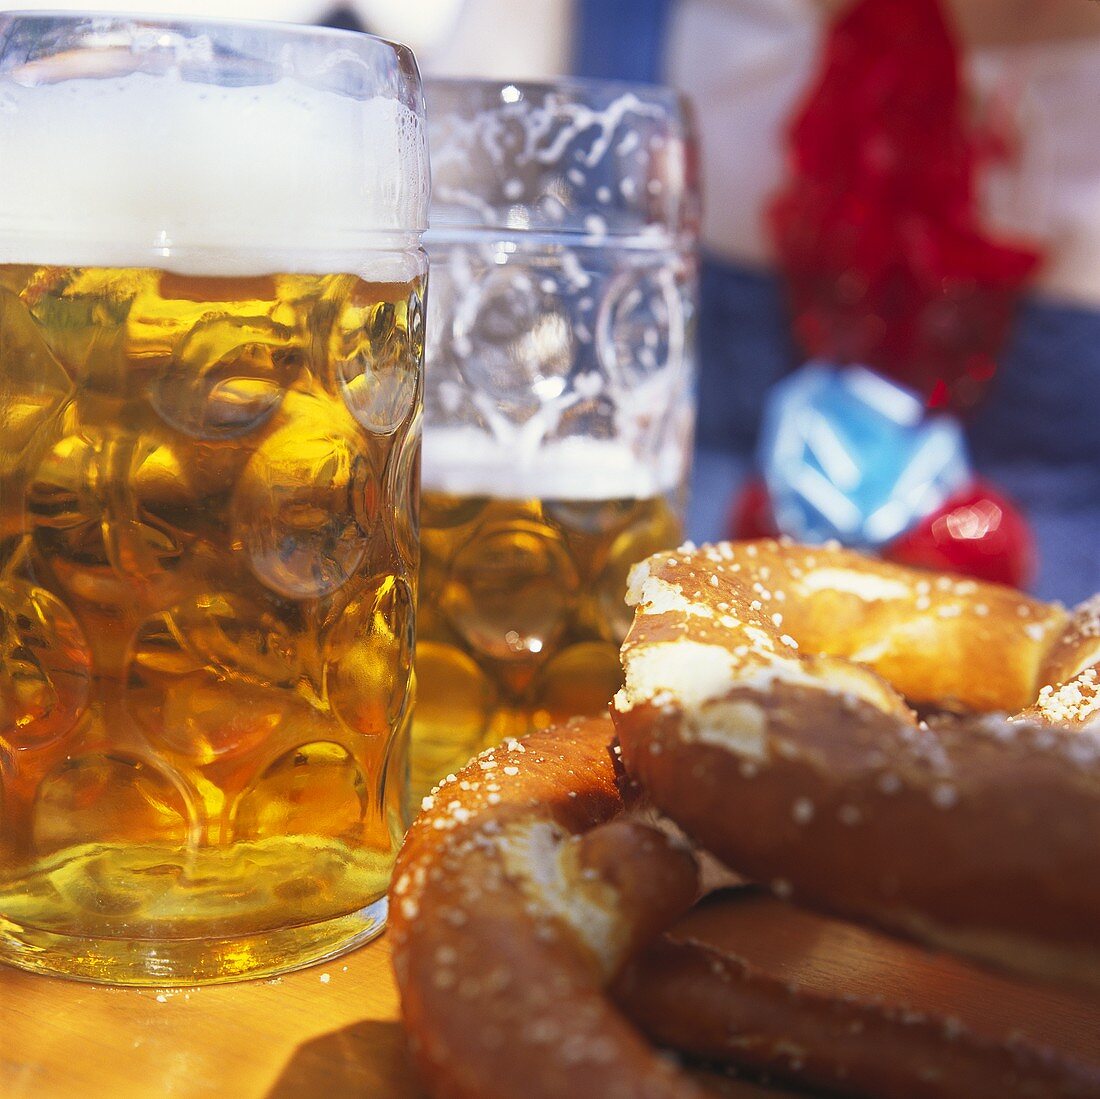 Tankards and pretzels on table (October Fest, Munich)